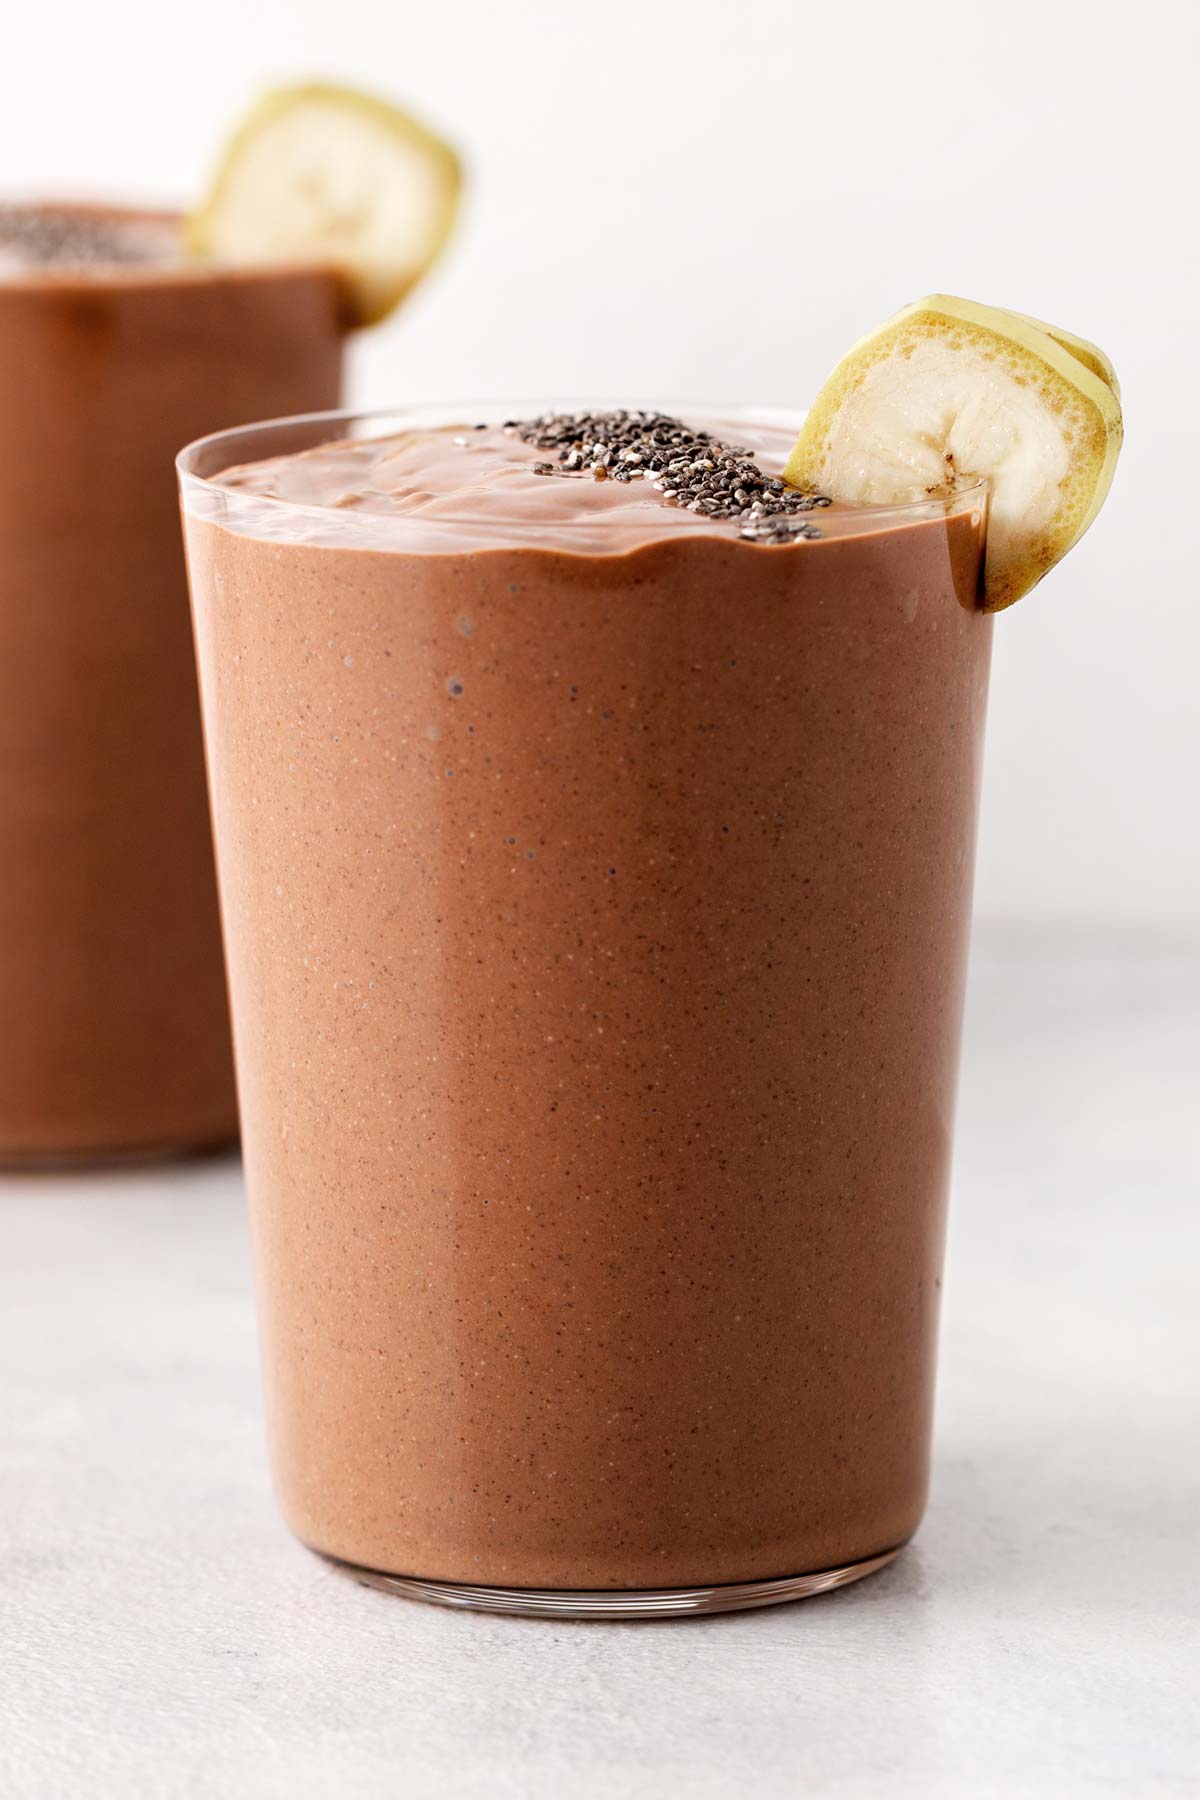 Chocolate almond smoothie in a glass.